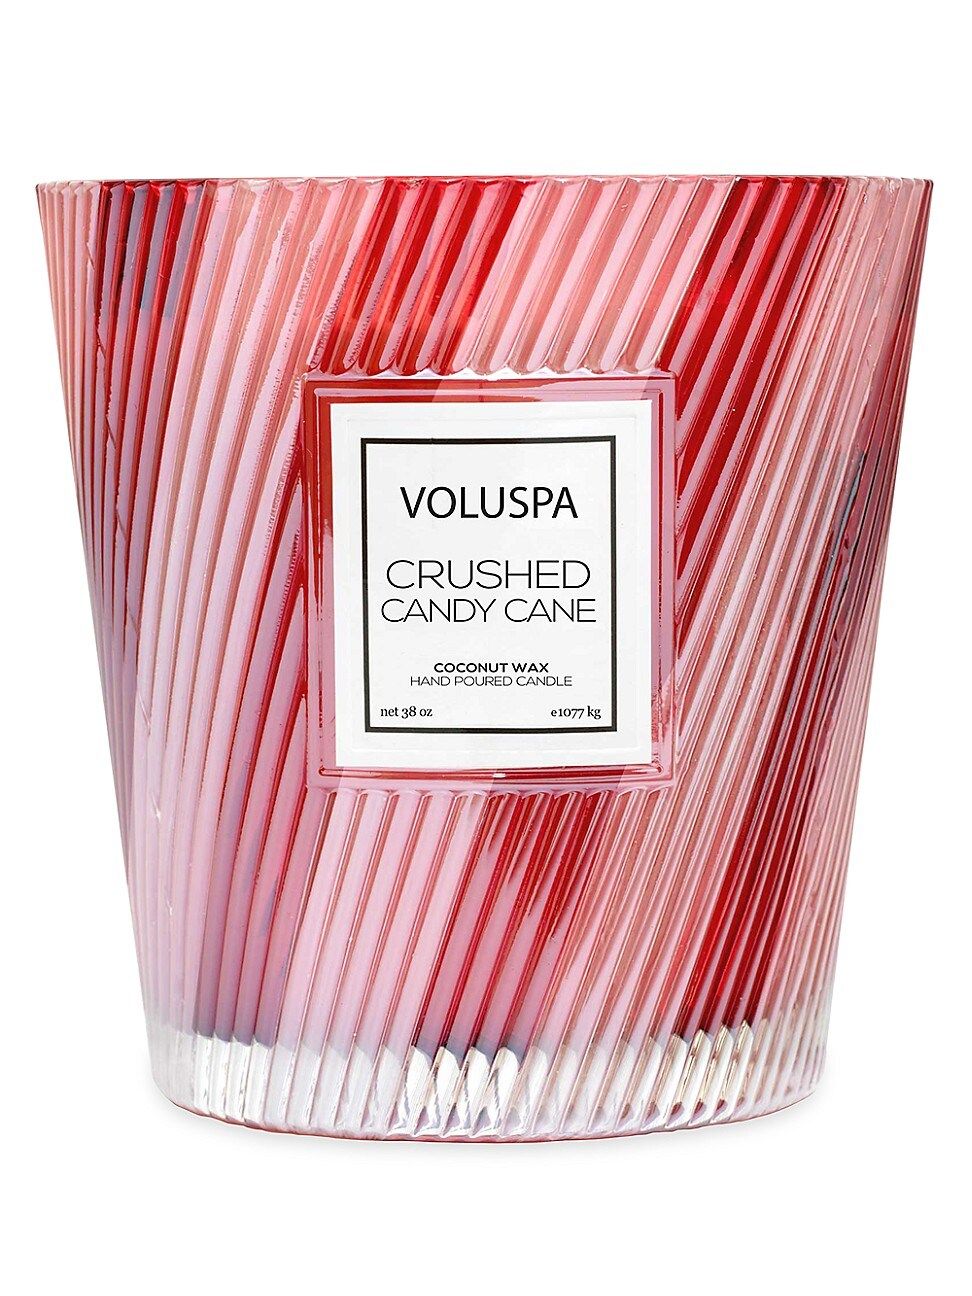 Crushed Candy Cane 3-Wick Candle | Saks Fifth Avenue